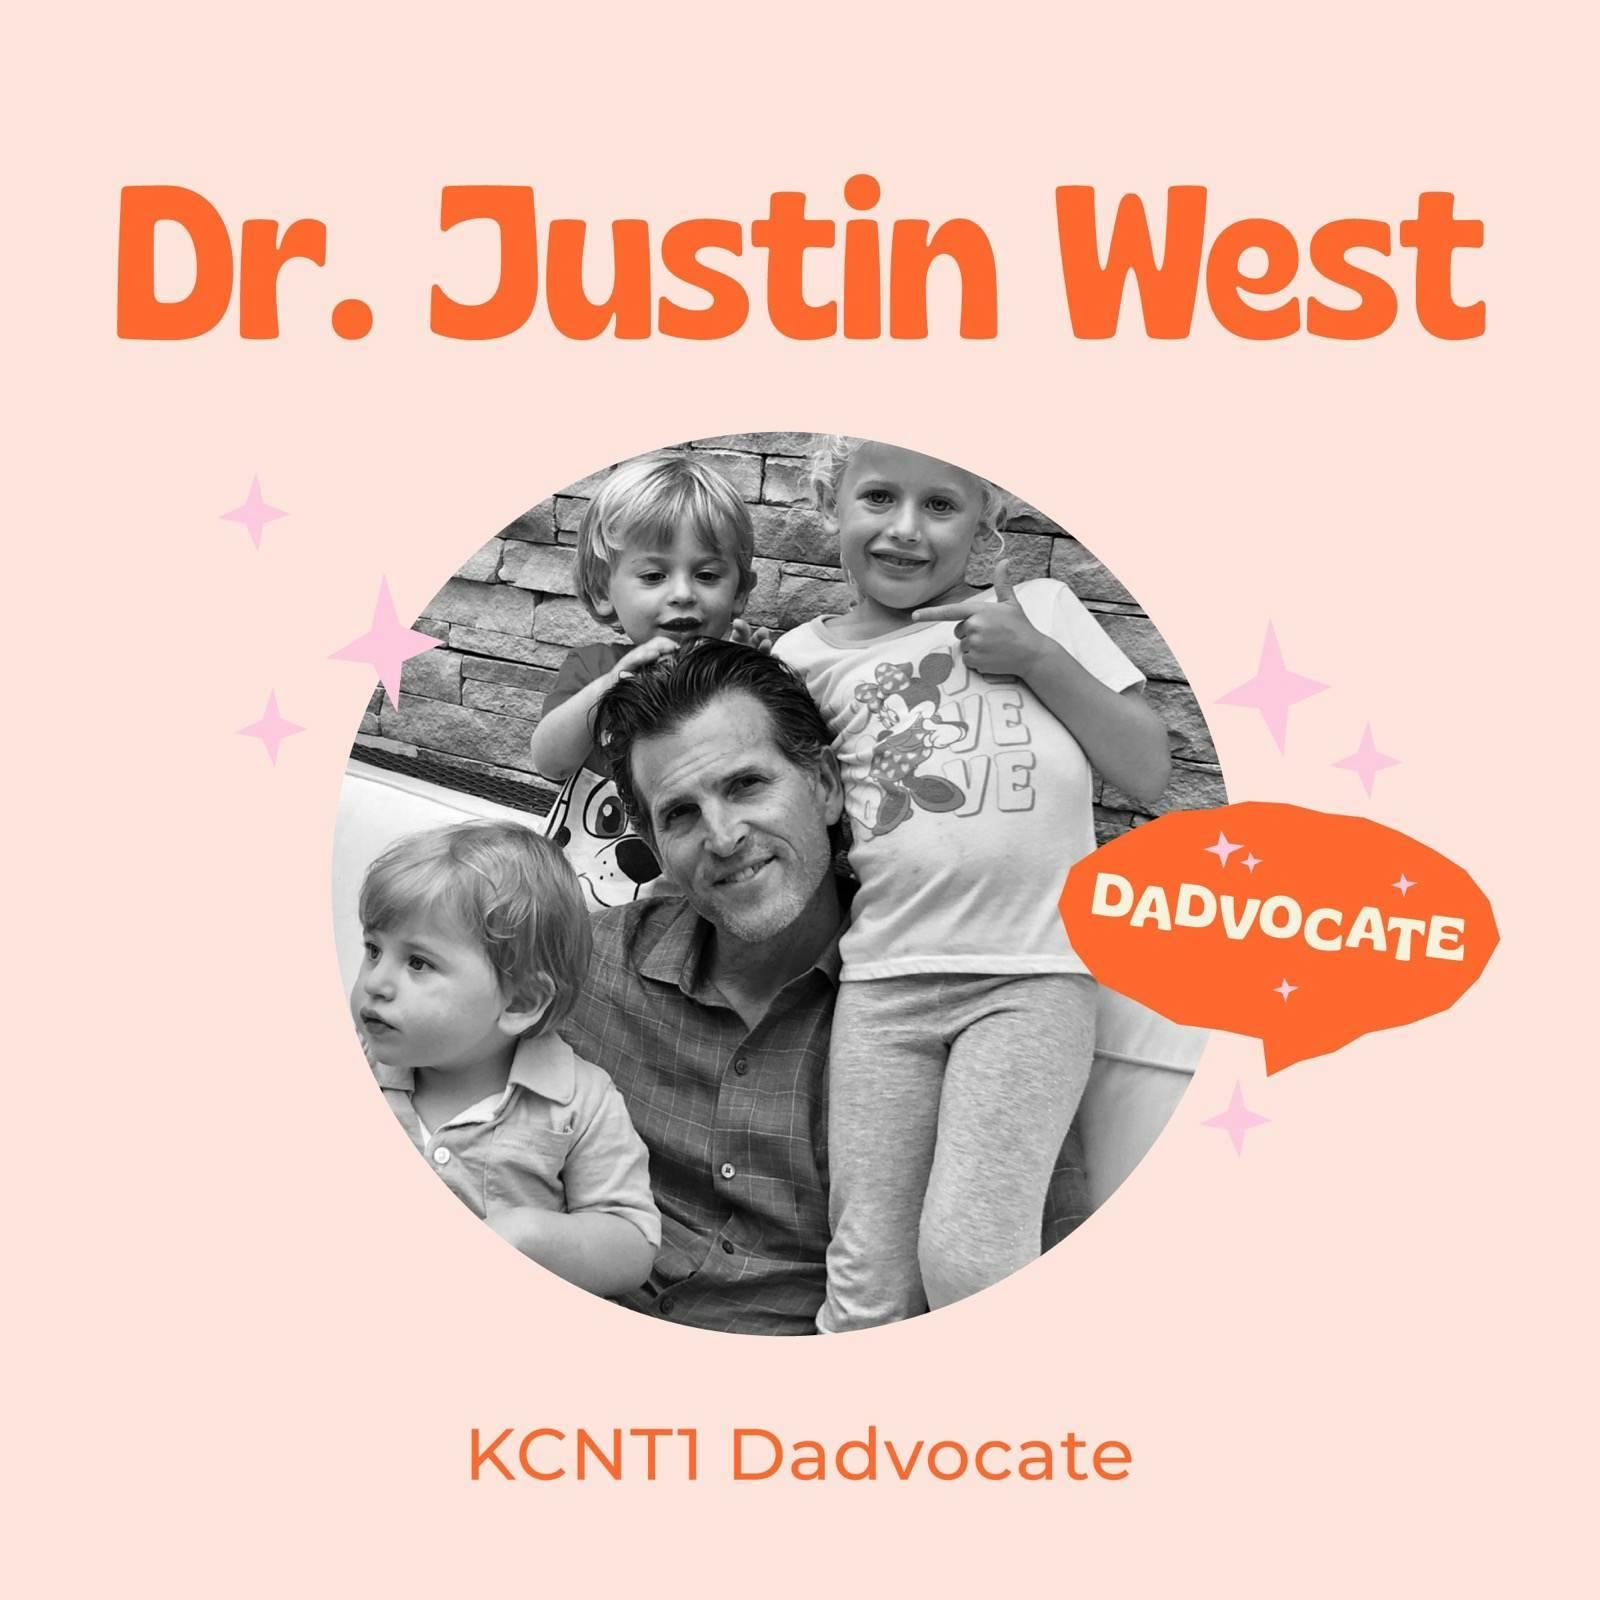 Doctor and Rare Disease Dad Is On A Mission to Accelerate Research and Drug Development Efforts for His Childs KCNT1 Epilepsy with Dadvocate Dr. Justin West